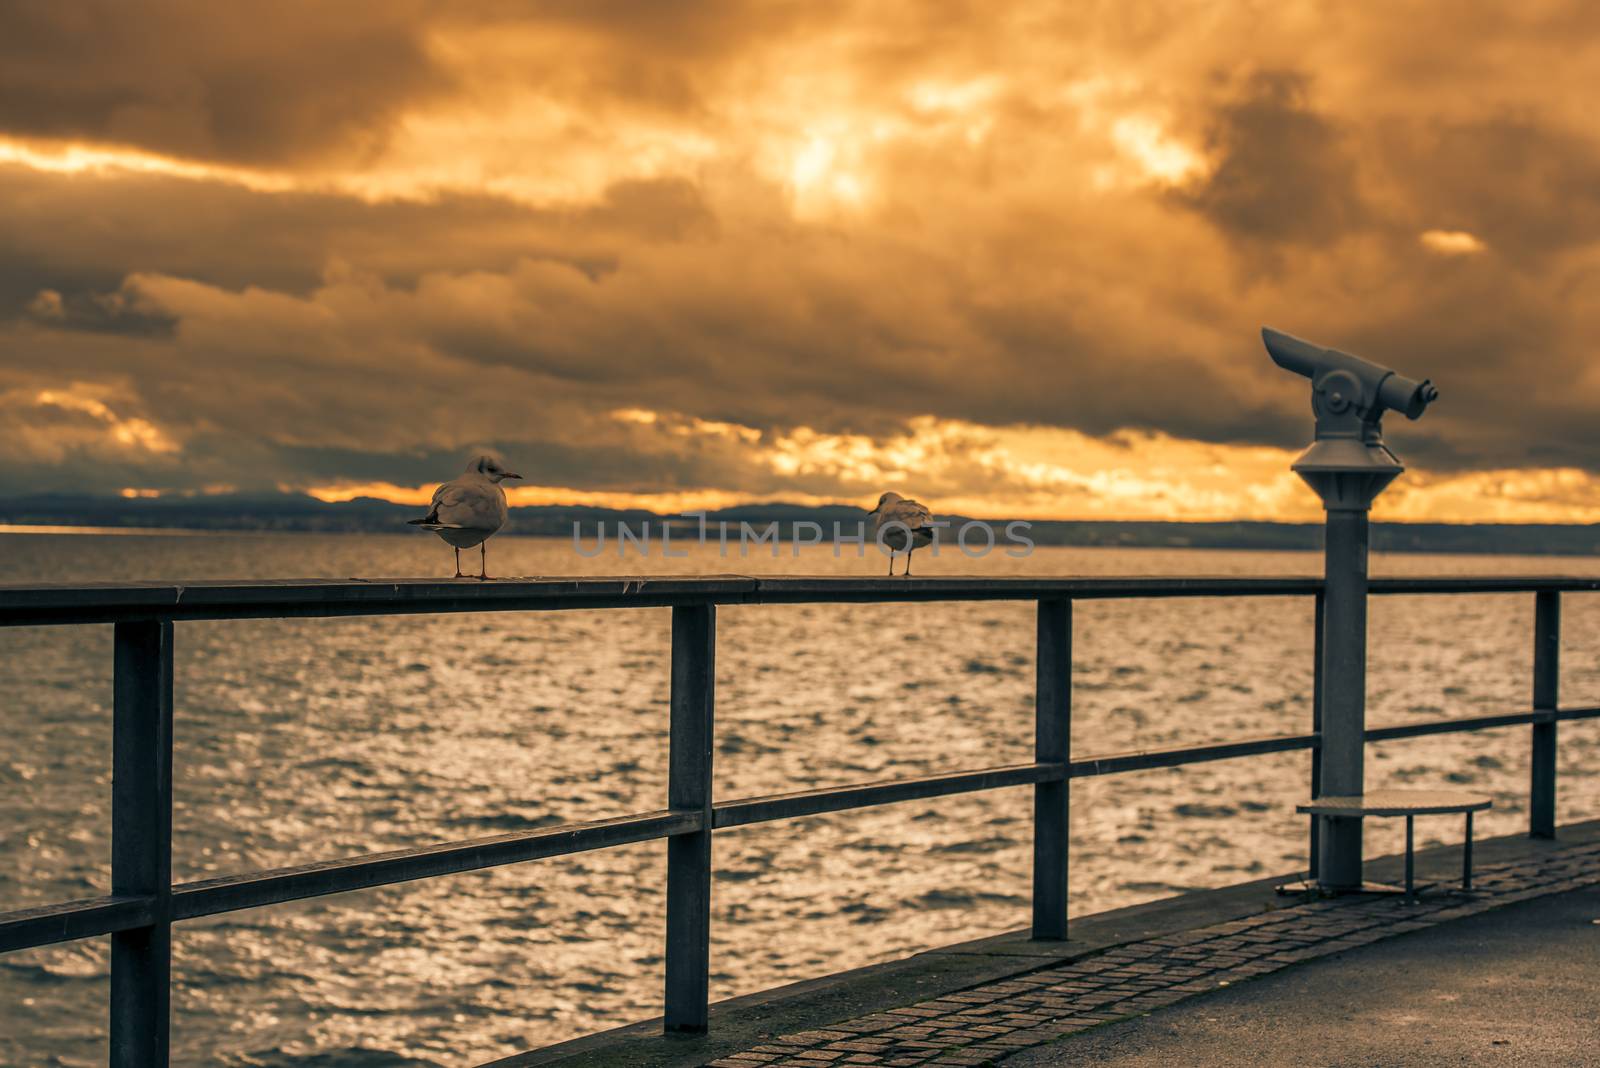 View with two seagulls on a metal railing and the tourists binocular on the boardwalk from the lake Bodensee, in Friedrichshafen city, Germany